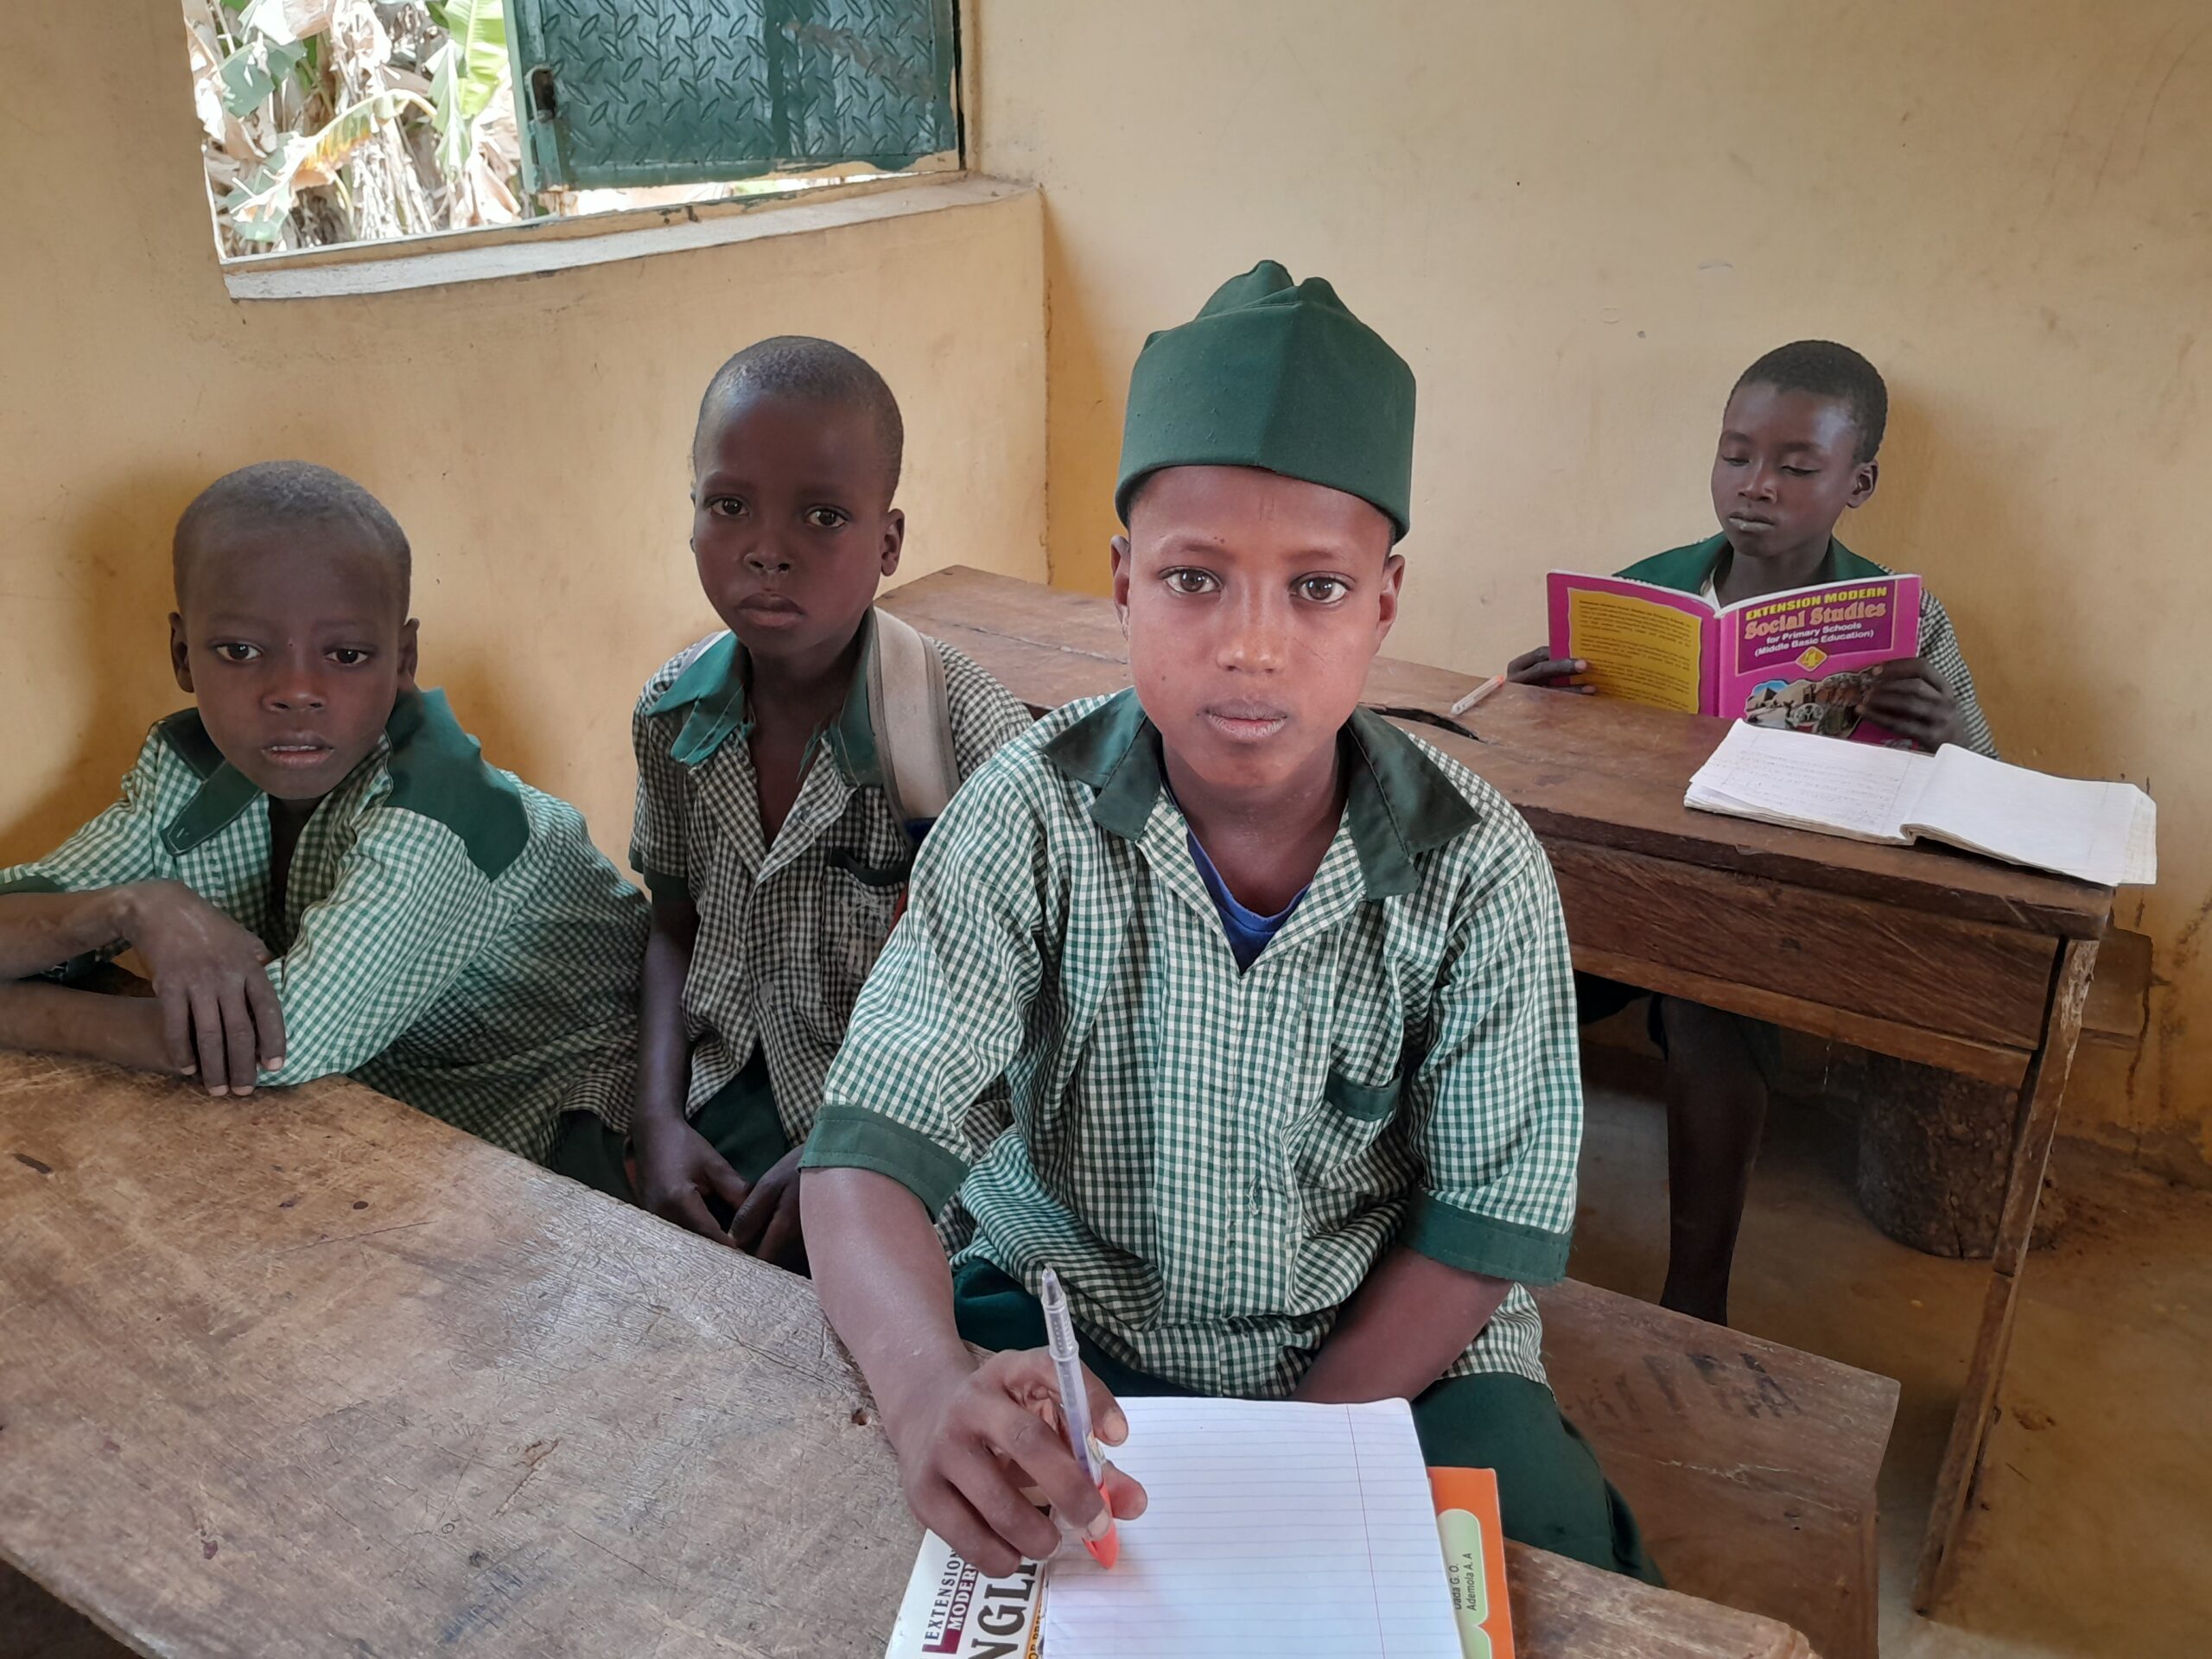 Abbas Adamu is aspiring to become an Engineer. For the meantime, he is focused on mastering the lessons they receive daily from their teacher. Photo Yahuza Bawage.